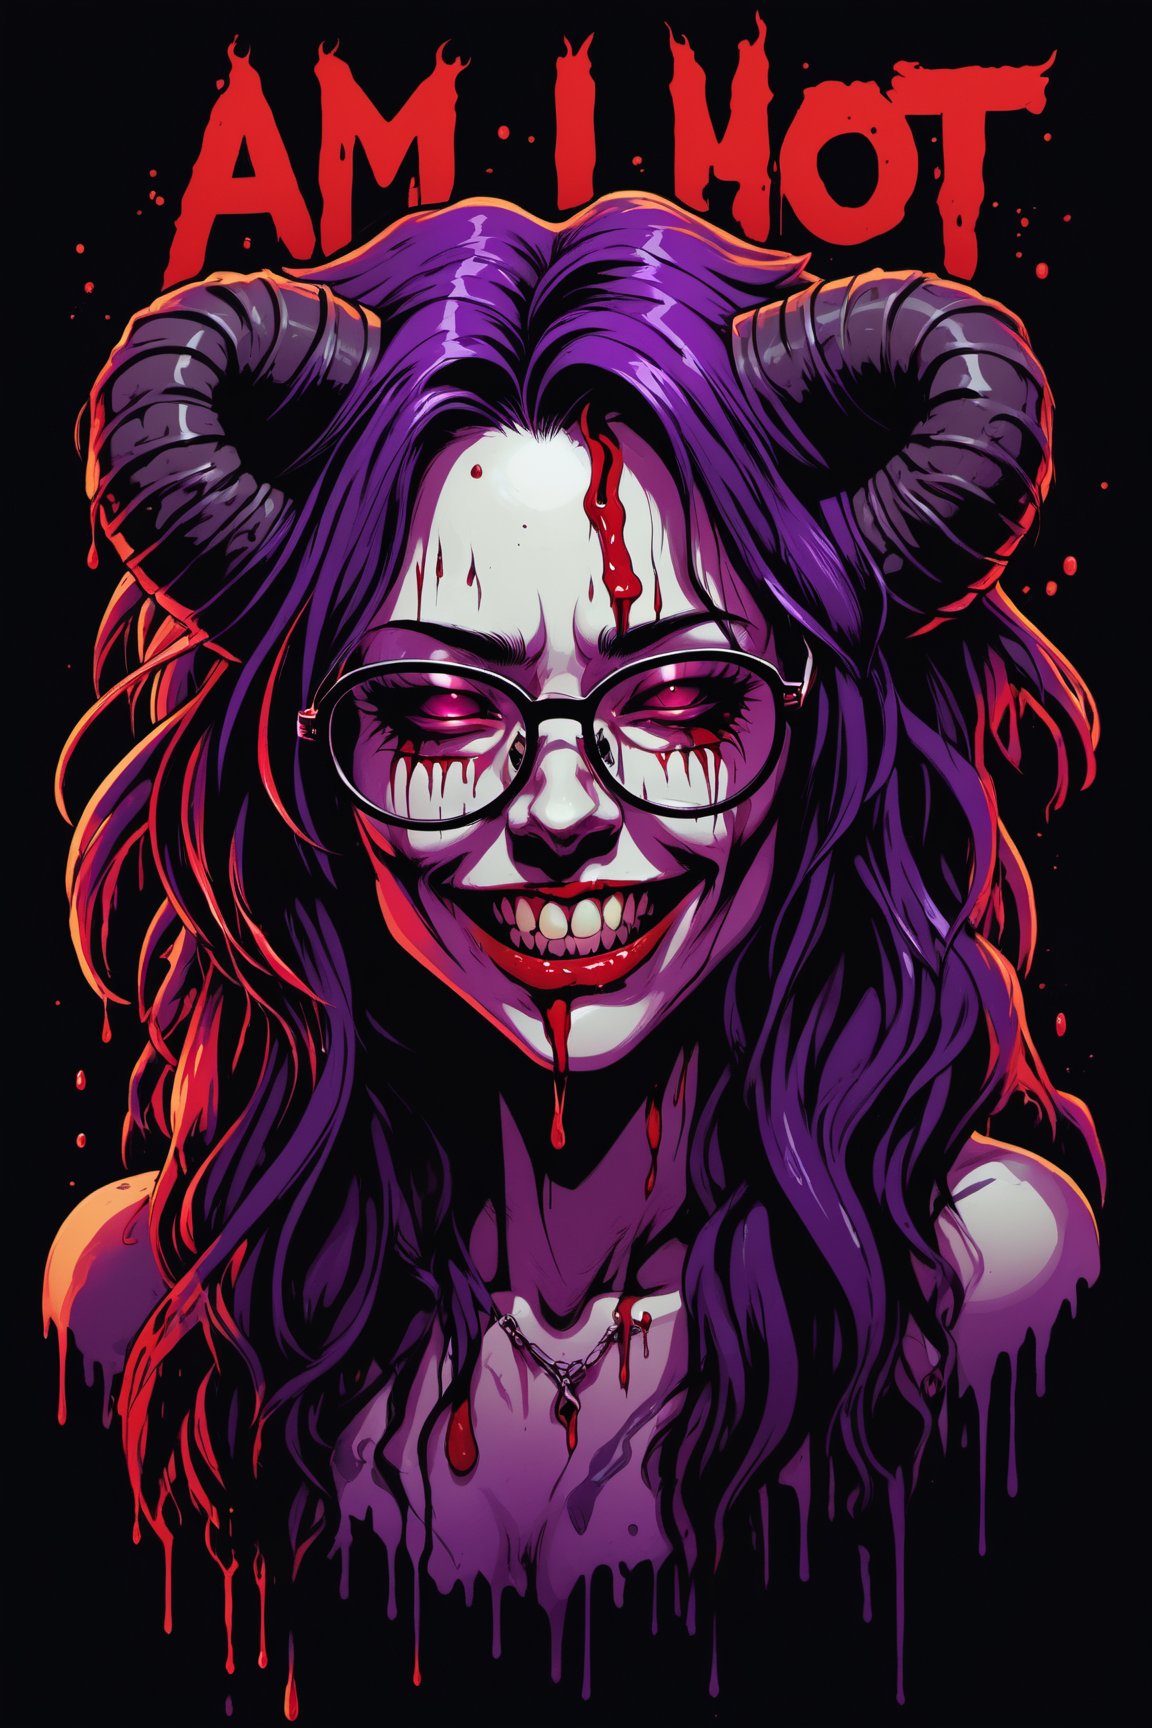 text "AM I HOT" text logo, purple, red, black background, dripping style, hell, (horned demon girl) with long messy hair and wearing glasses, she is evil lewd smililg, side view, from below angle